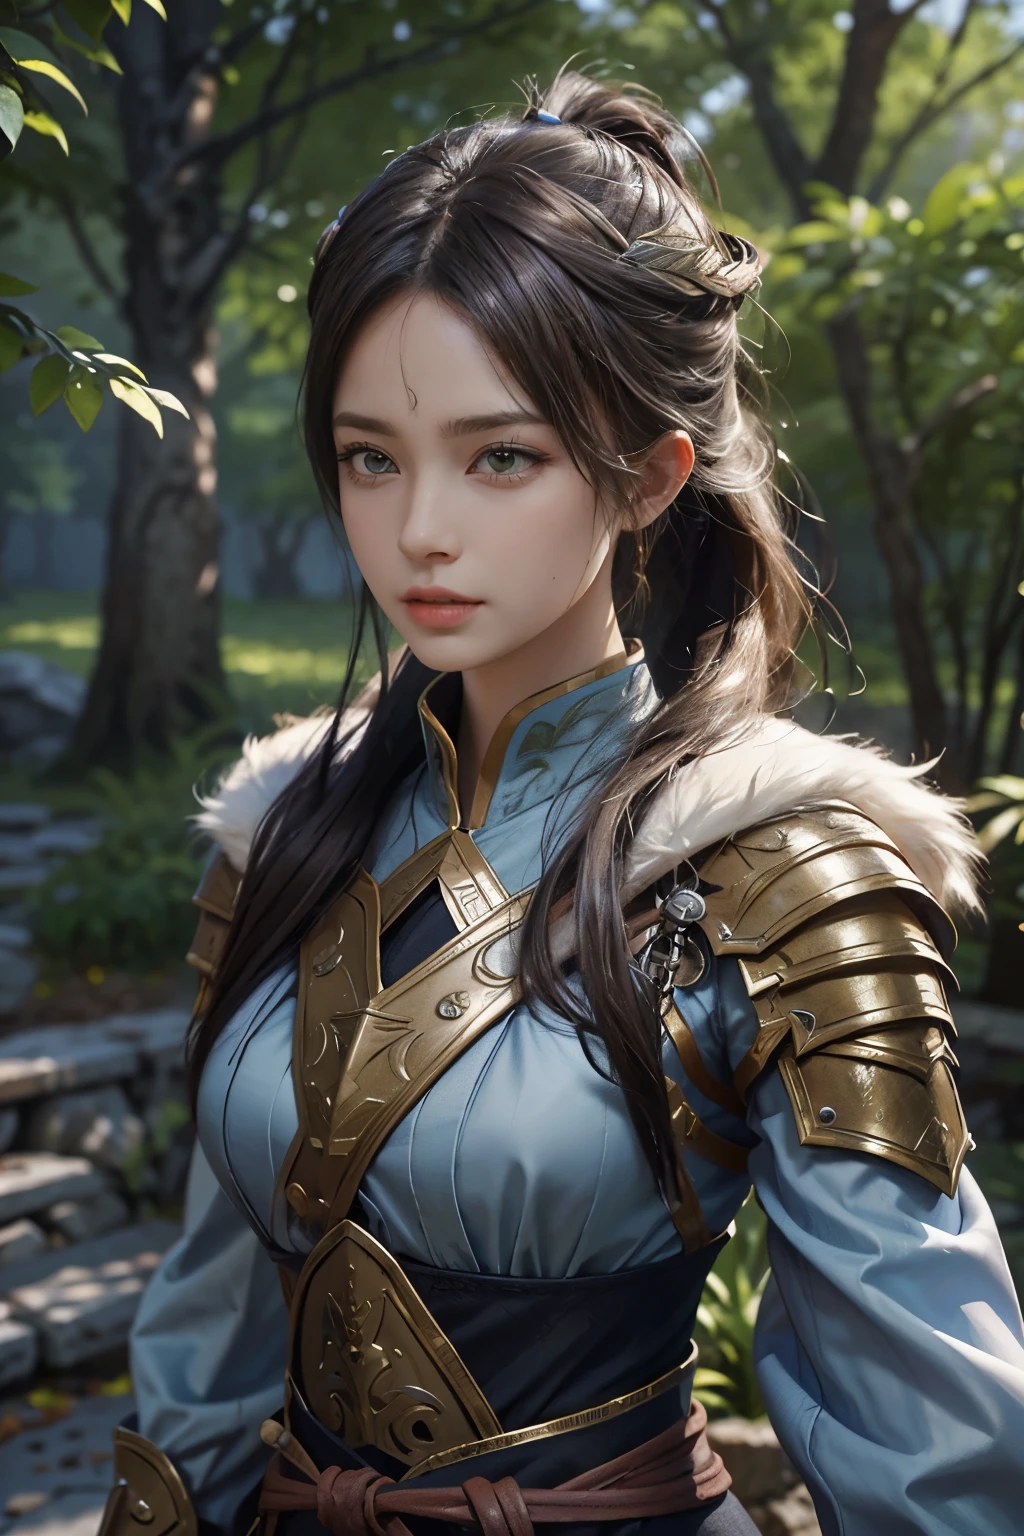 Game art，The best picture quality，Highest resolution，8K，(A bust photograph)，(Portrait)，(Head close-up)，(Rule of thirds)，Unreal Engine 5 rendering works， (The Girl of the Future)，(Female Warrior)， 
20-year-old girl，((Hunter))，An eye rich in detail，(Big breasts)，Elegant and noble，indifferent，brave，
（Medieval-style fur combat clothing，Glowing magic lines，Animal skin clothing with rich detailedieval Lady Knight，Medieval ranger，
Photo poses，Simple background，Movie lights，Ray tracing，Game CG，((3D Unreal Engine))，oc rendering reflection pattern